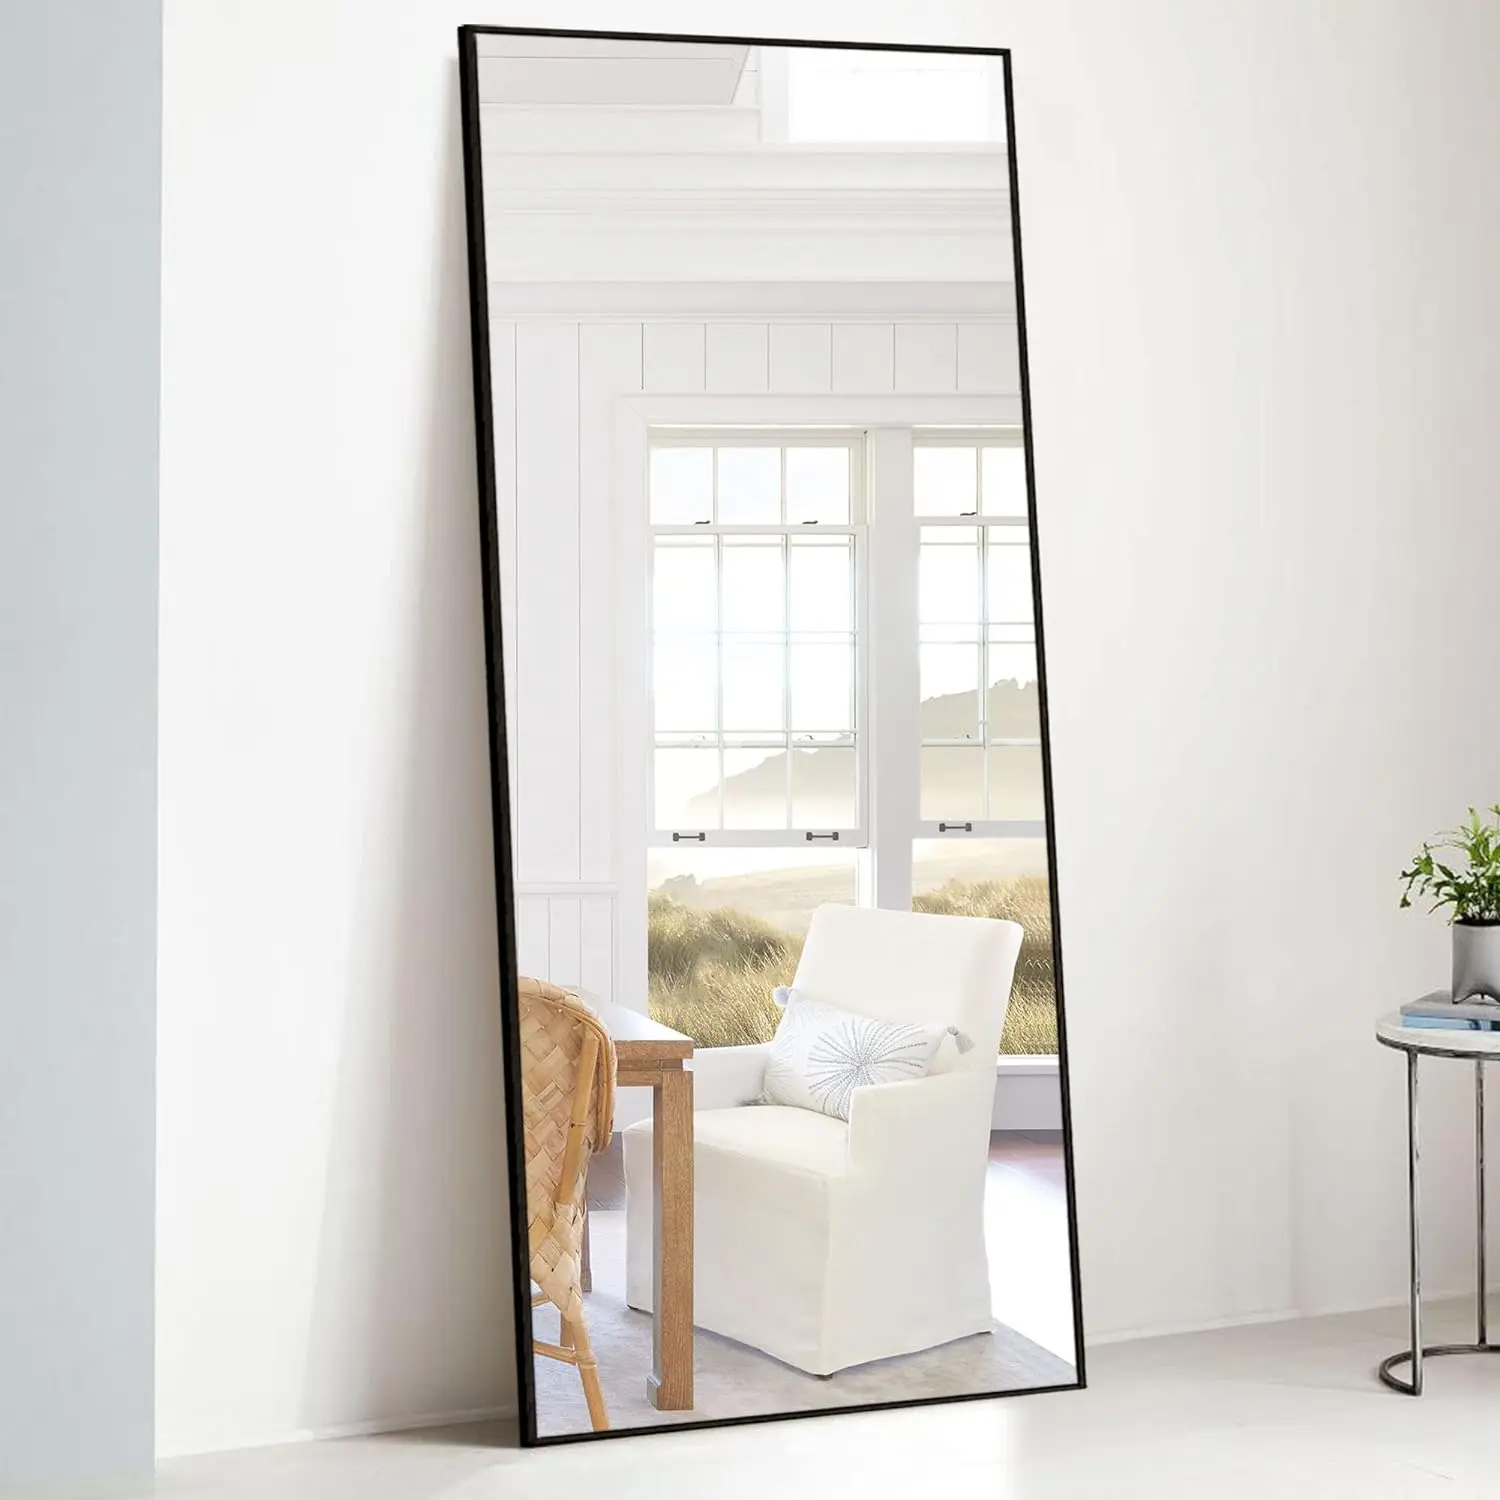 

NeuType Floor Full Length Mirror Standing Full Body Dressing Mirrors with Stand Hanging Wall Mounted Large Rectangle